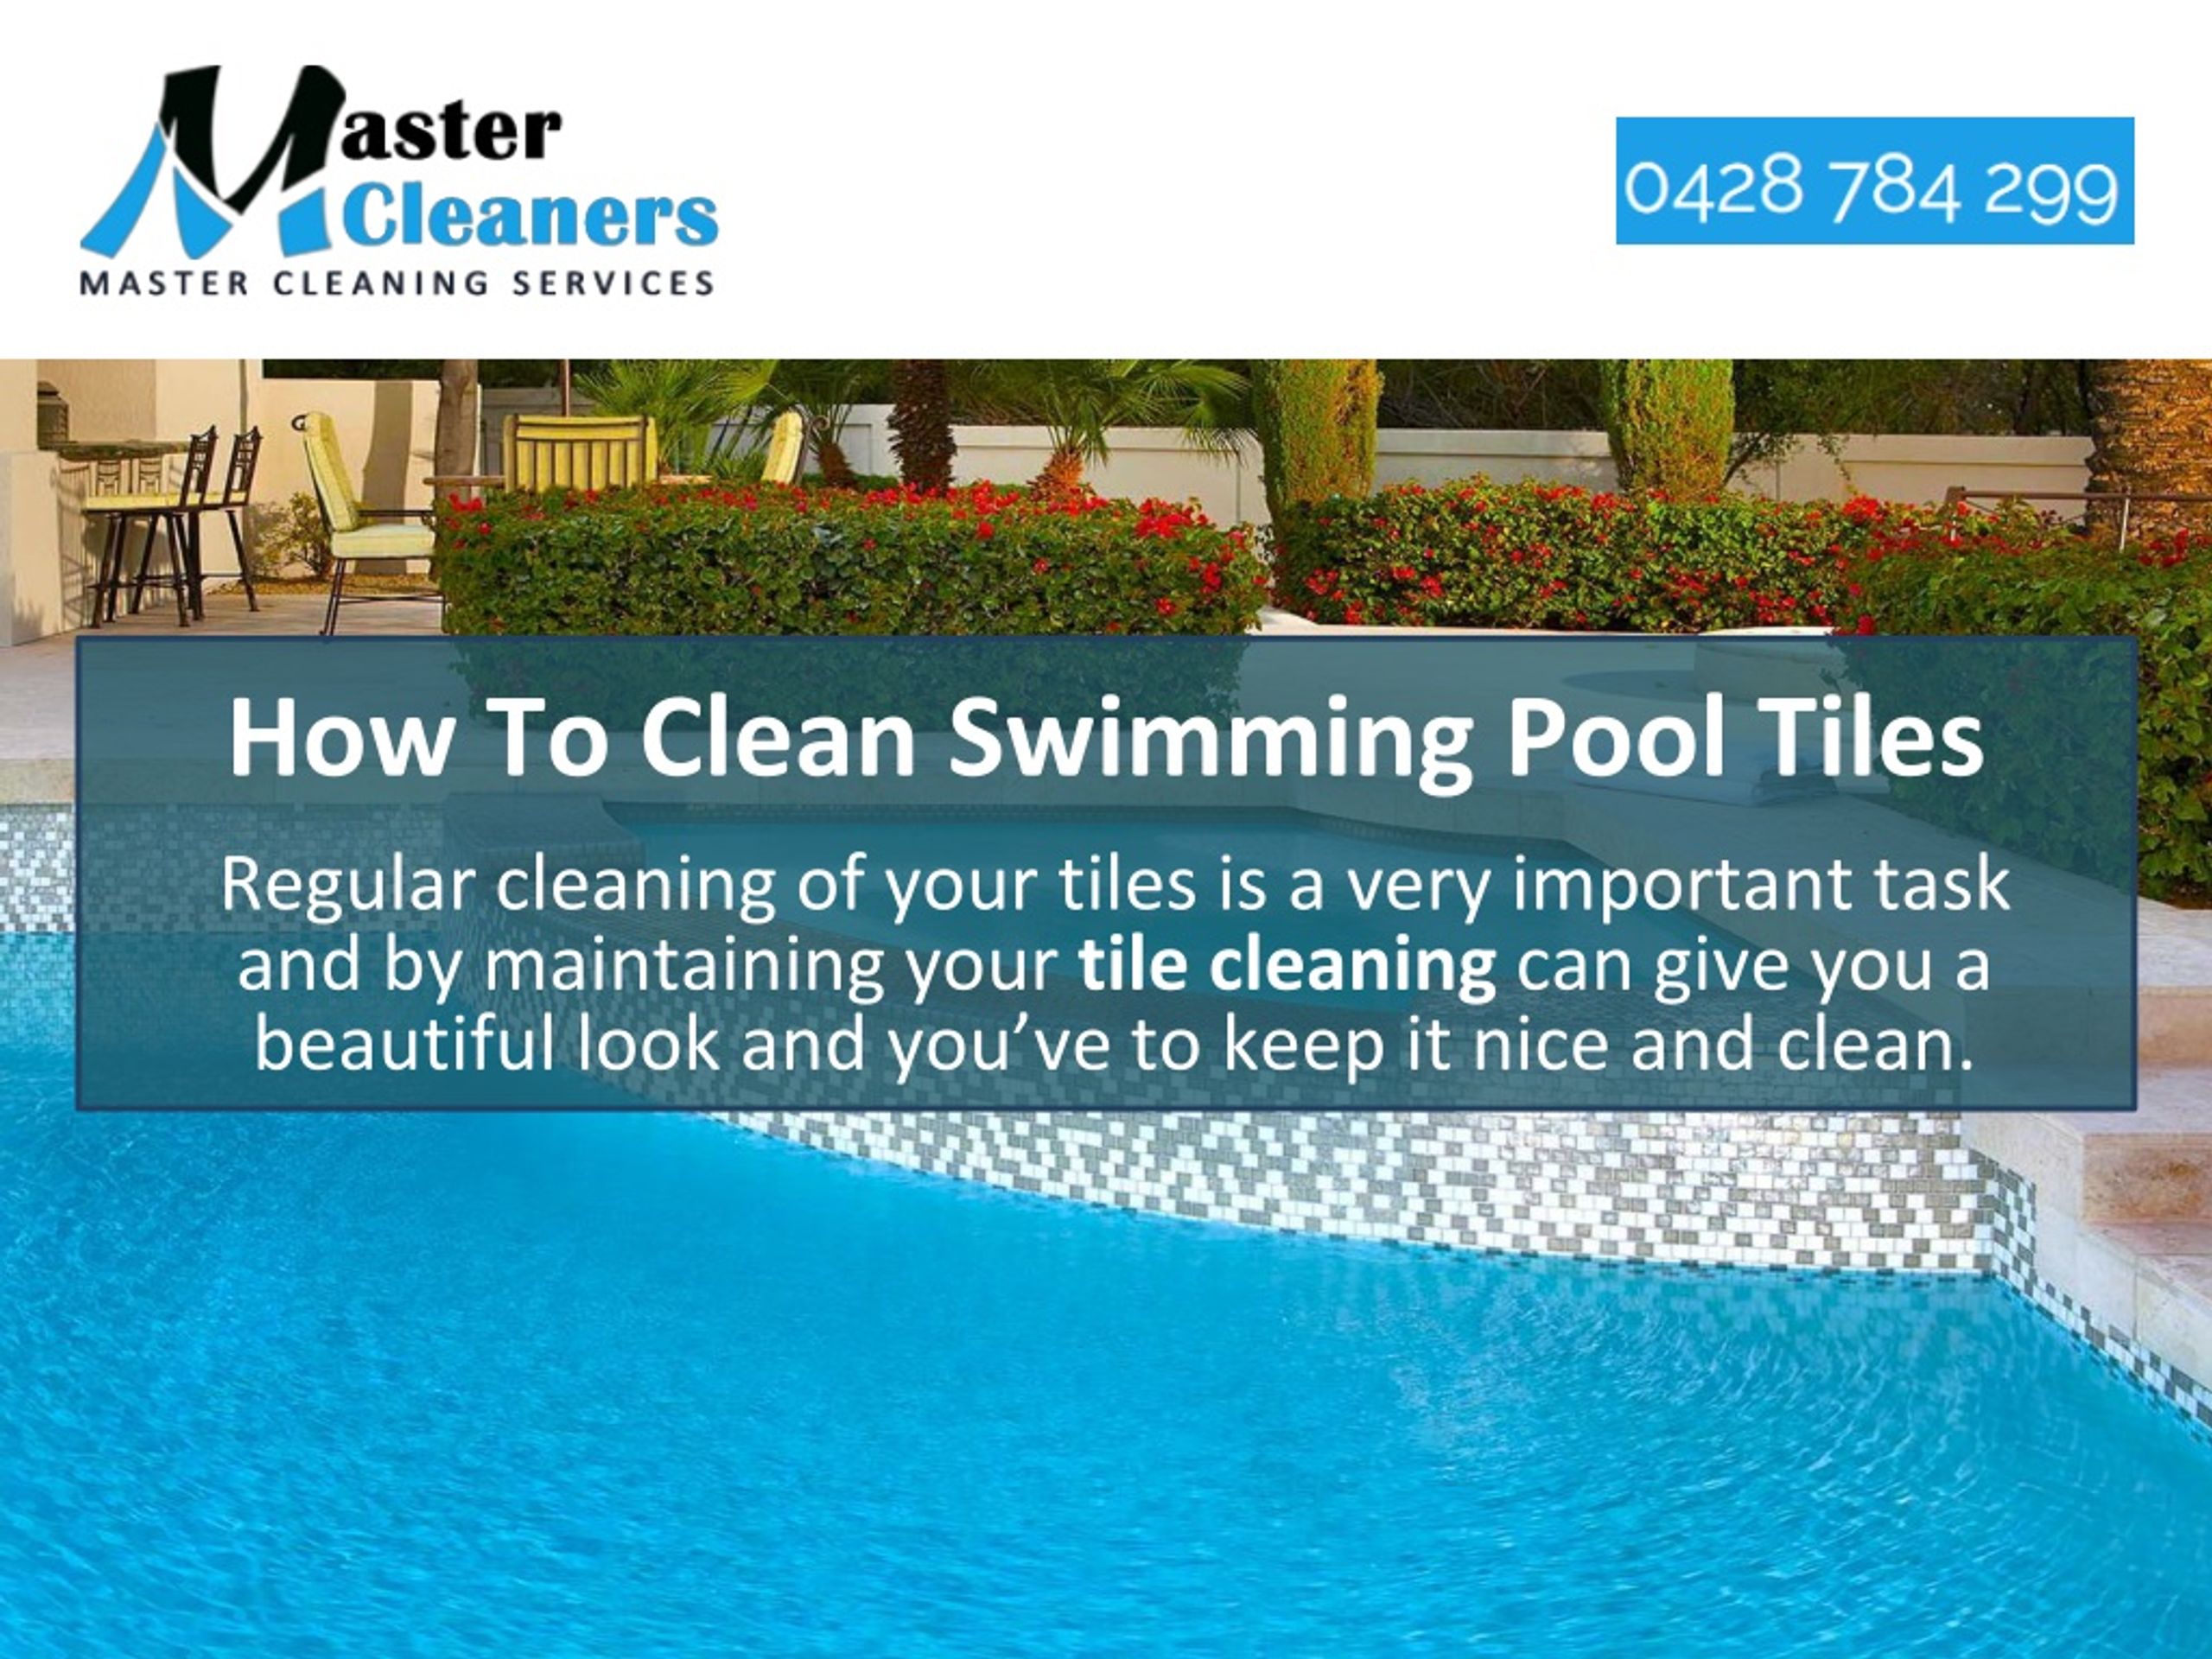 Ppt How To Clean Swimming Pool Tiles, How To Clean Glass Pool Tile With Muriatic Acid